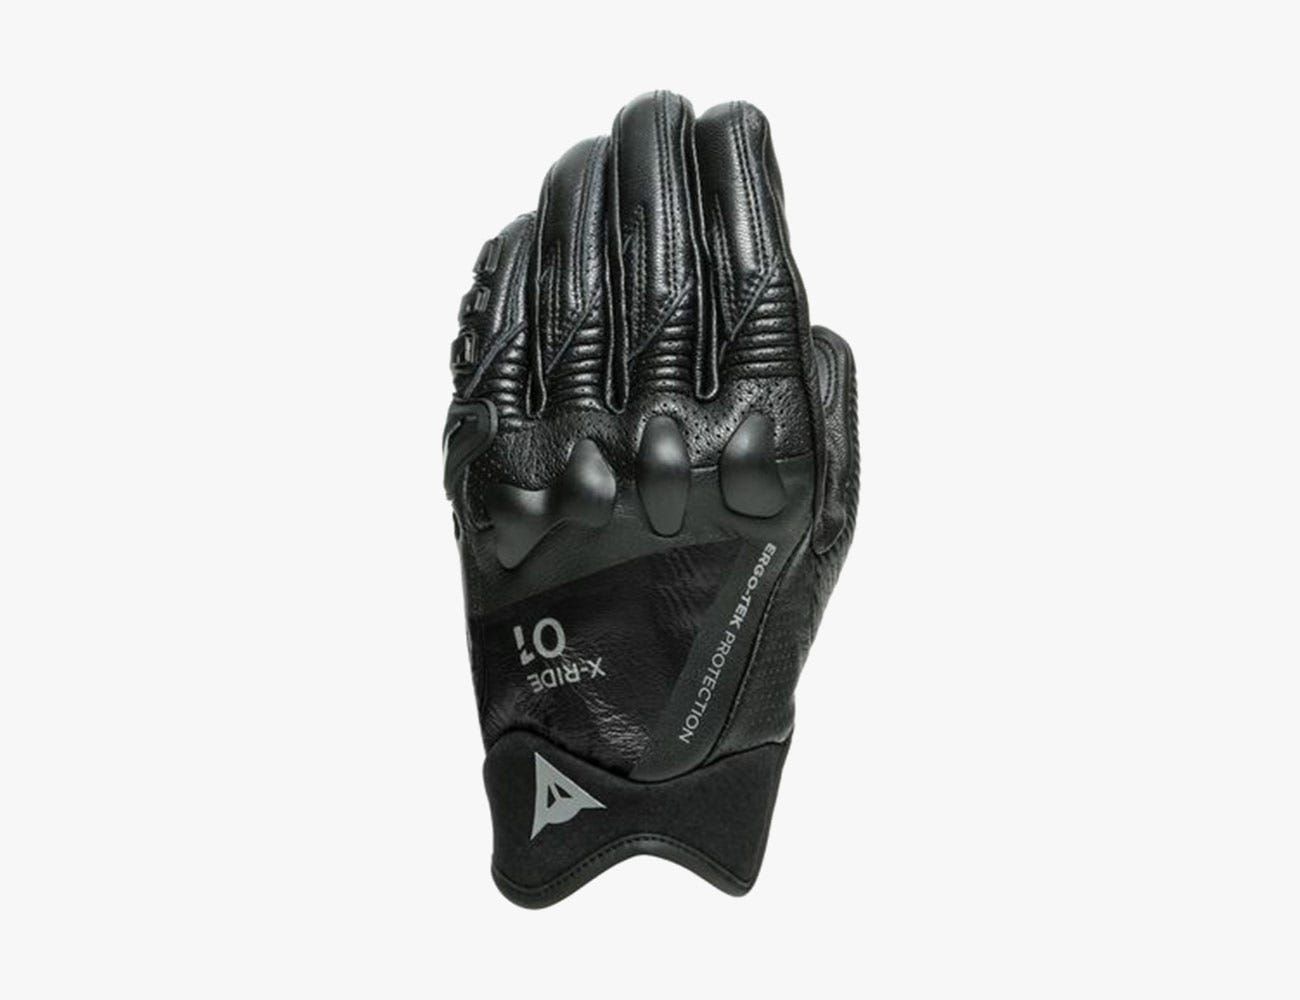 Sports Comm Waterproof Leather Textile Motorcycle Gloves Motorbike Commuter 